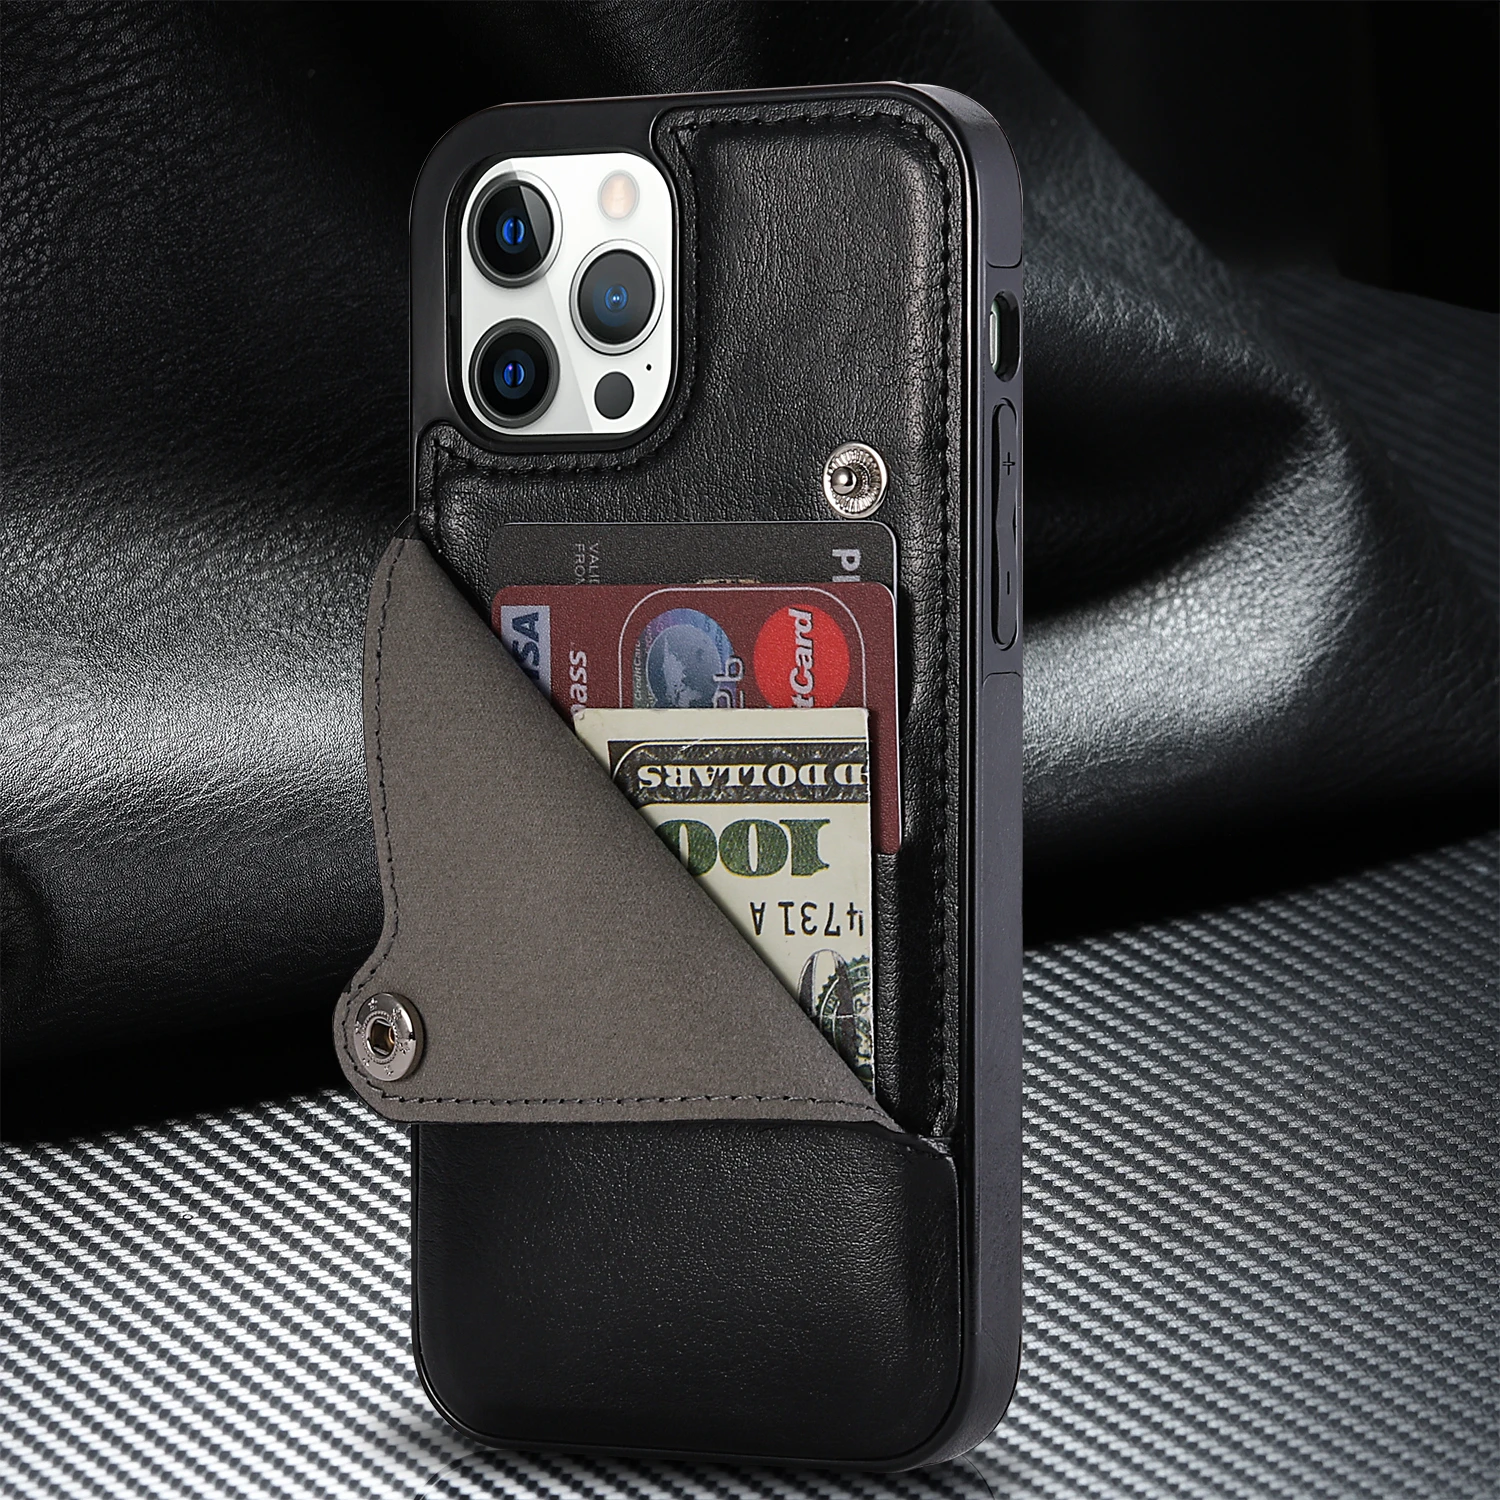 Luxury Leather Case For Samsung Galaxy S7 S8 S9 S10 E S20 FE Plus Ultra Note 8 9 10 20 Lite Wallet Card Slots Stand Phone Cover